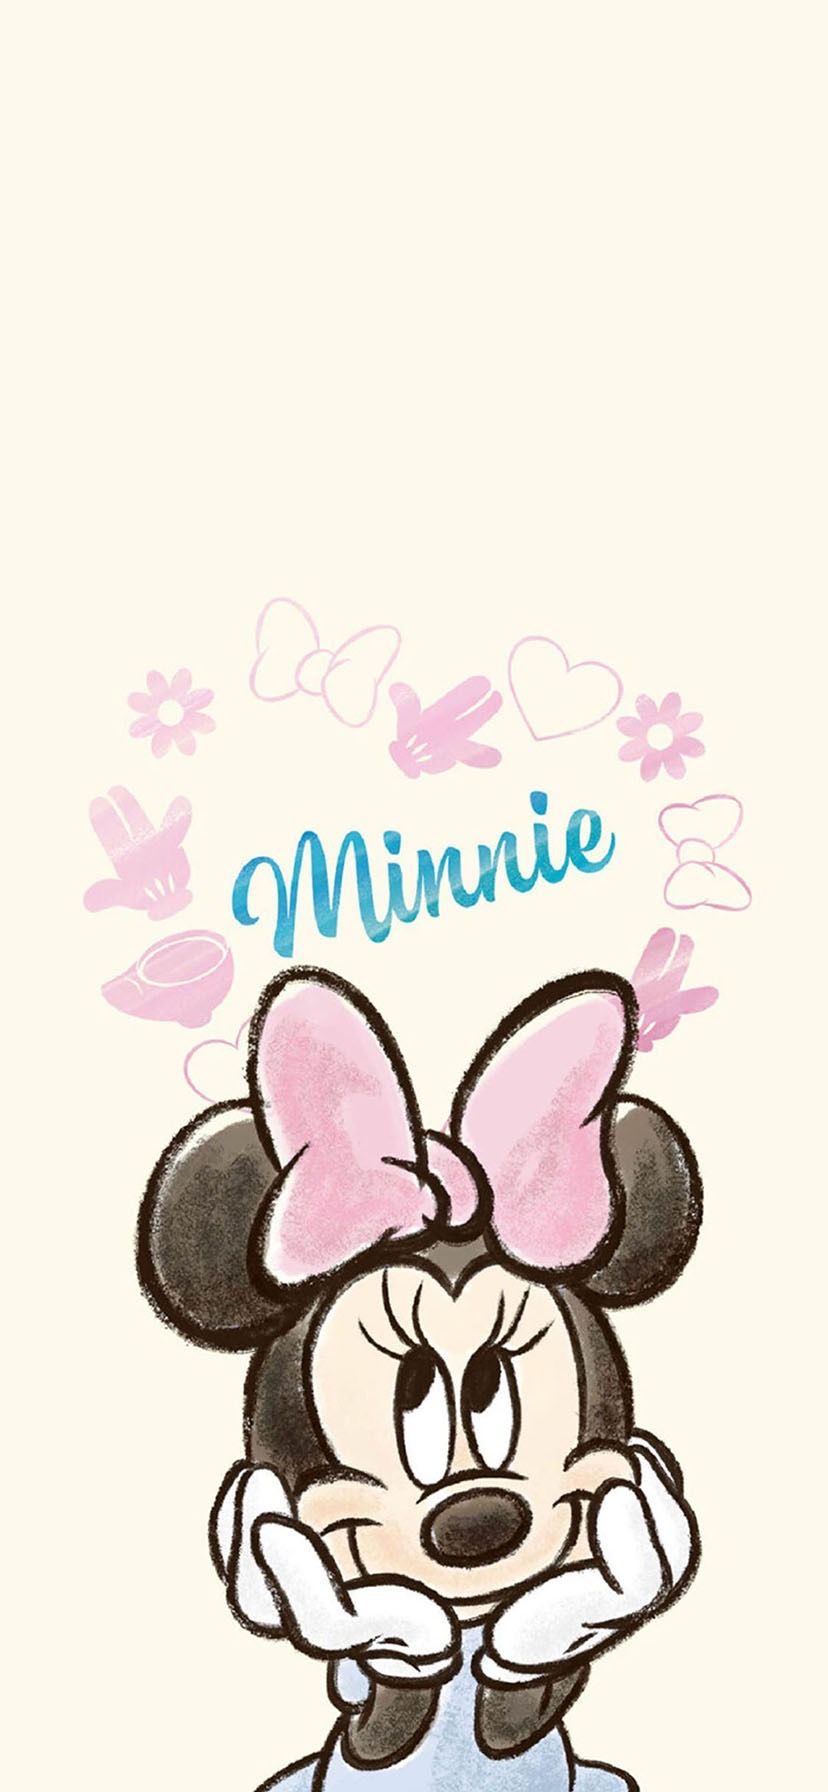 IPhone wallpaper of Minnie Mouse from Disney - Minnie Mouse